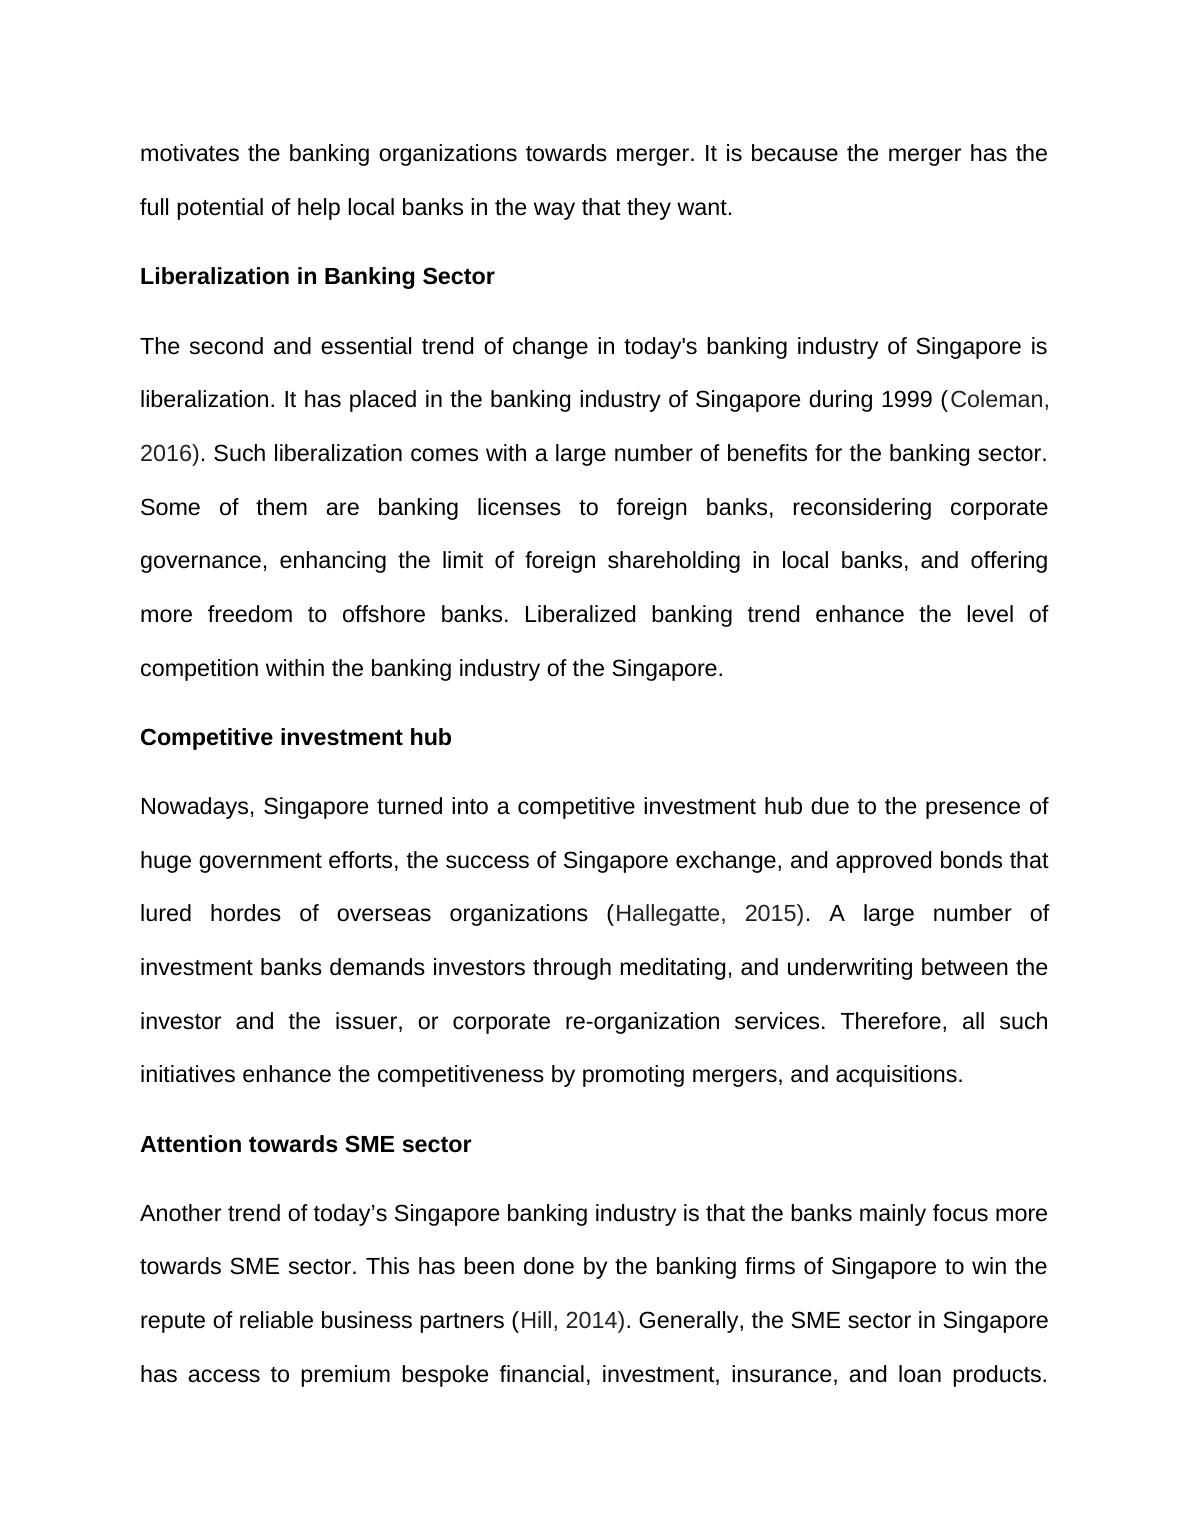 Paper on Banking Industry: Bank of Singapore_5